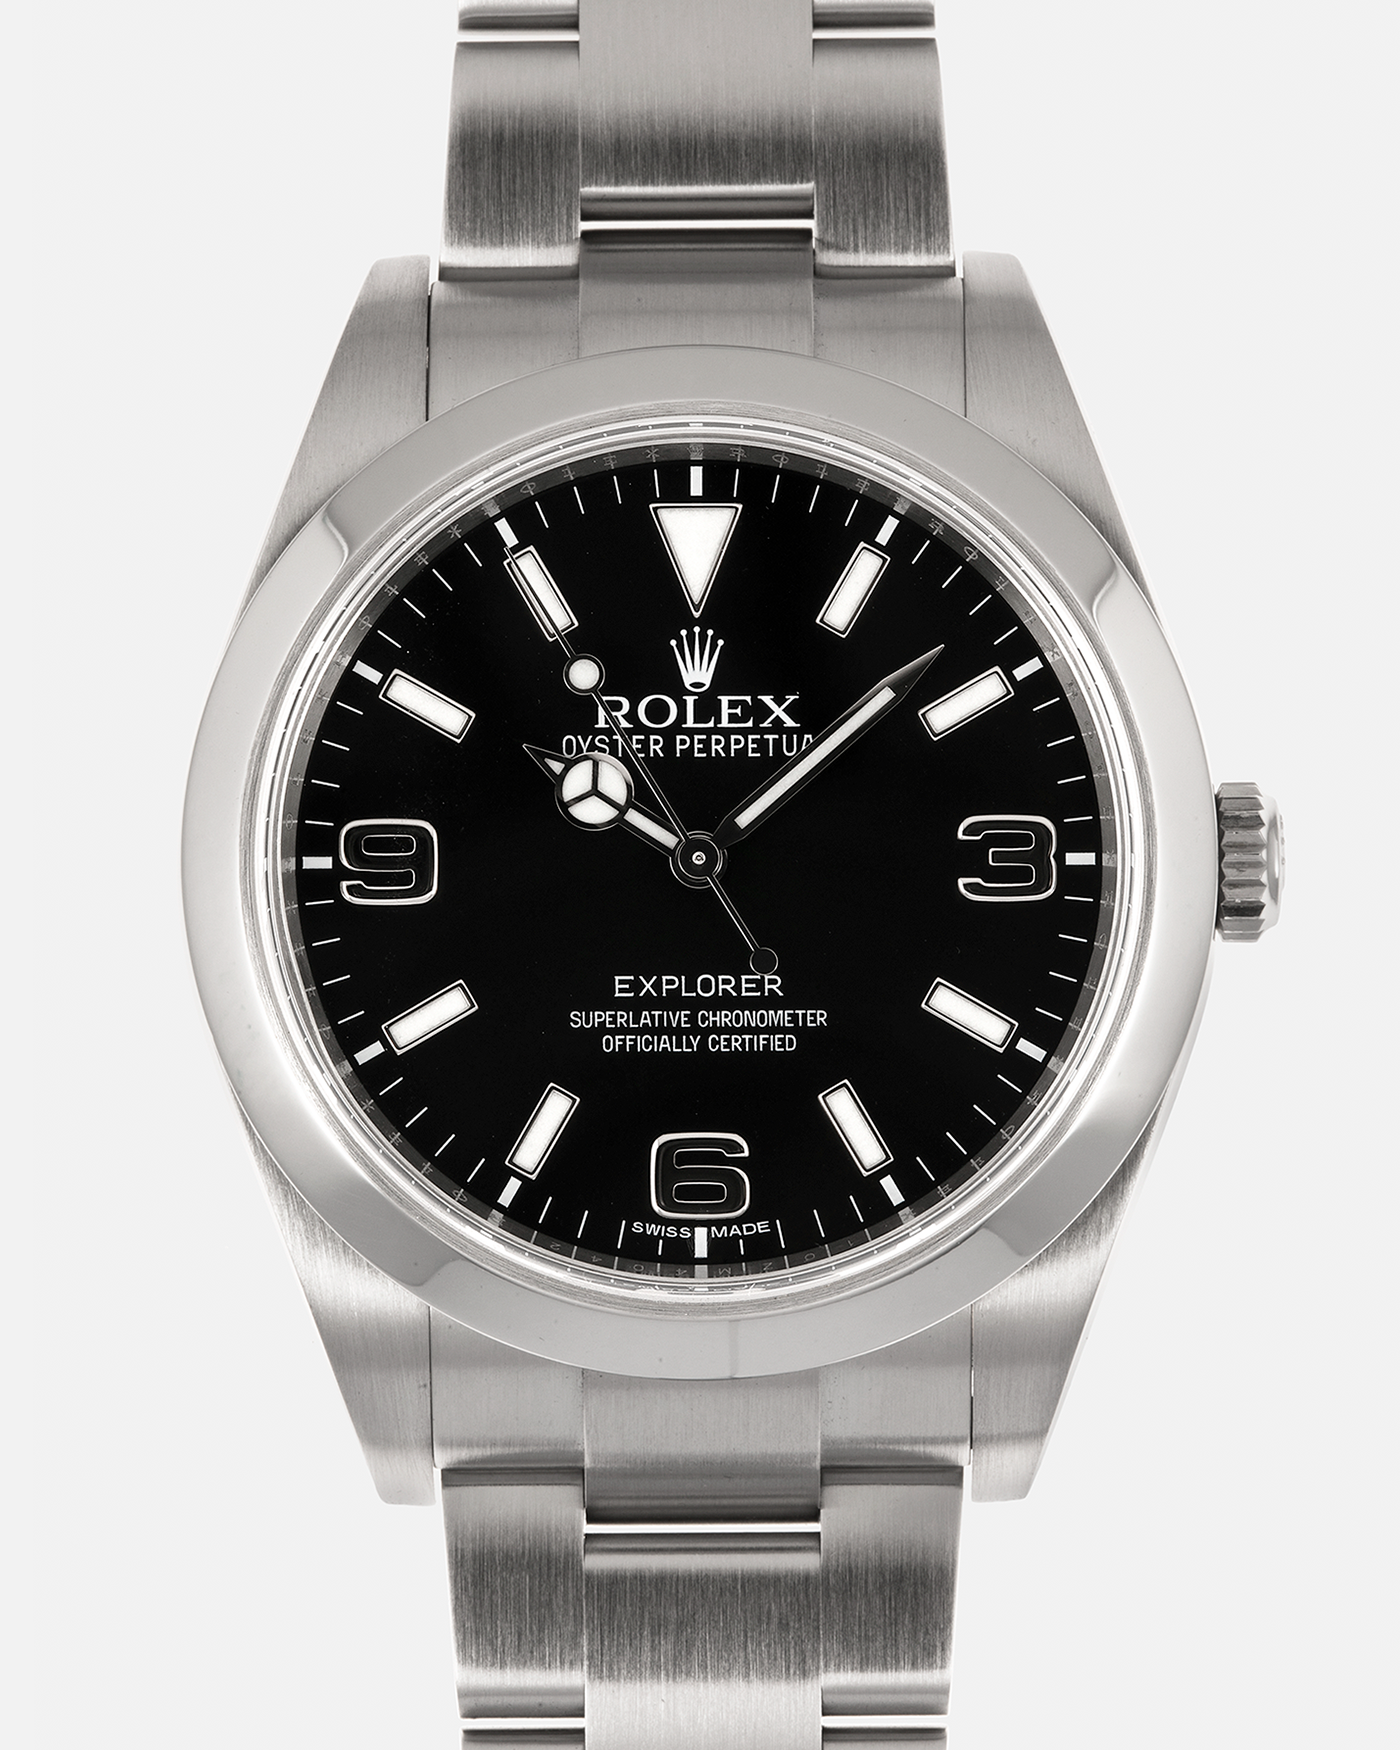 Brand: Rolex Year: 2015 Model: Oyster Perpetual Explorer I Reference Number: 214270 Case Material: Oystersteel (904L Stainless Steel) Movement: Rolex Cal. 3132, Self-Winding Case Diameter: 39mm Lug Width: 20mm Bracelet: Rolex Oyster Bracelet in Oystersteel with Signed Oysterlock Clasp